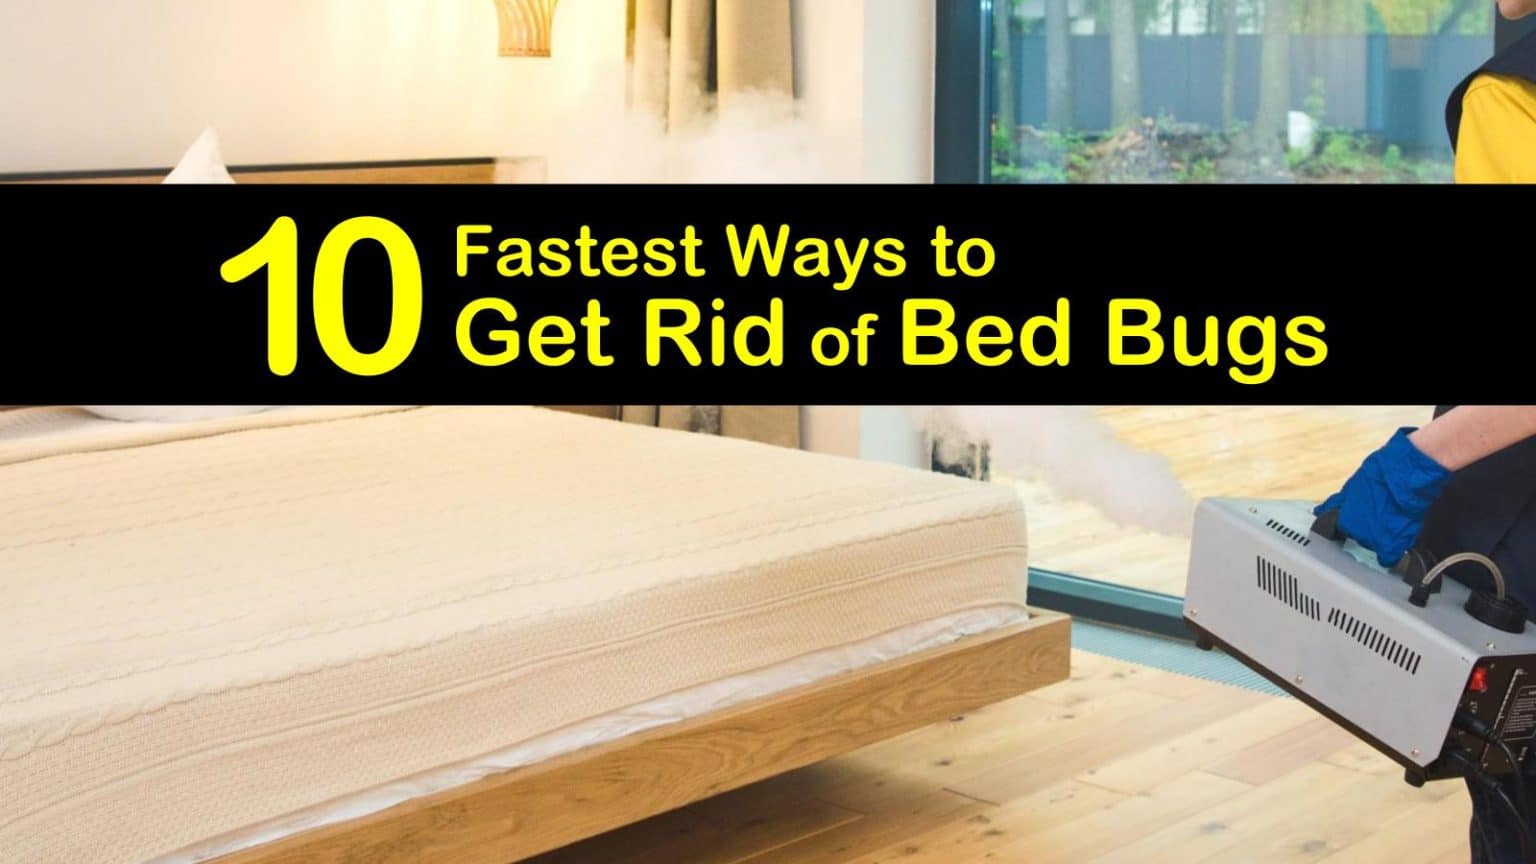 10 of the Fastest Ways to Get Rid of Bed Bugs